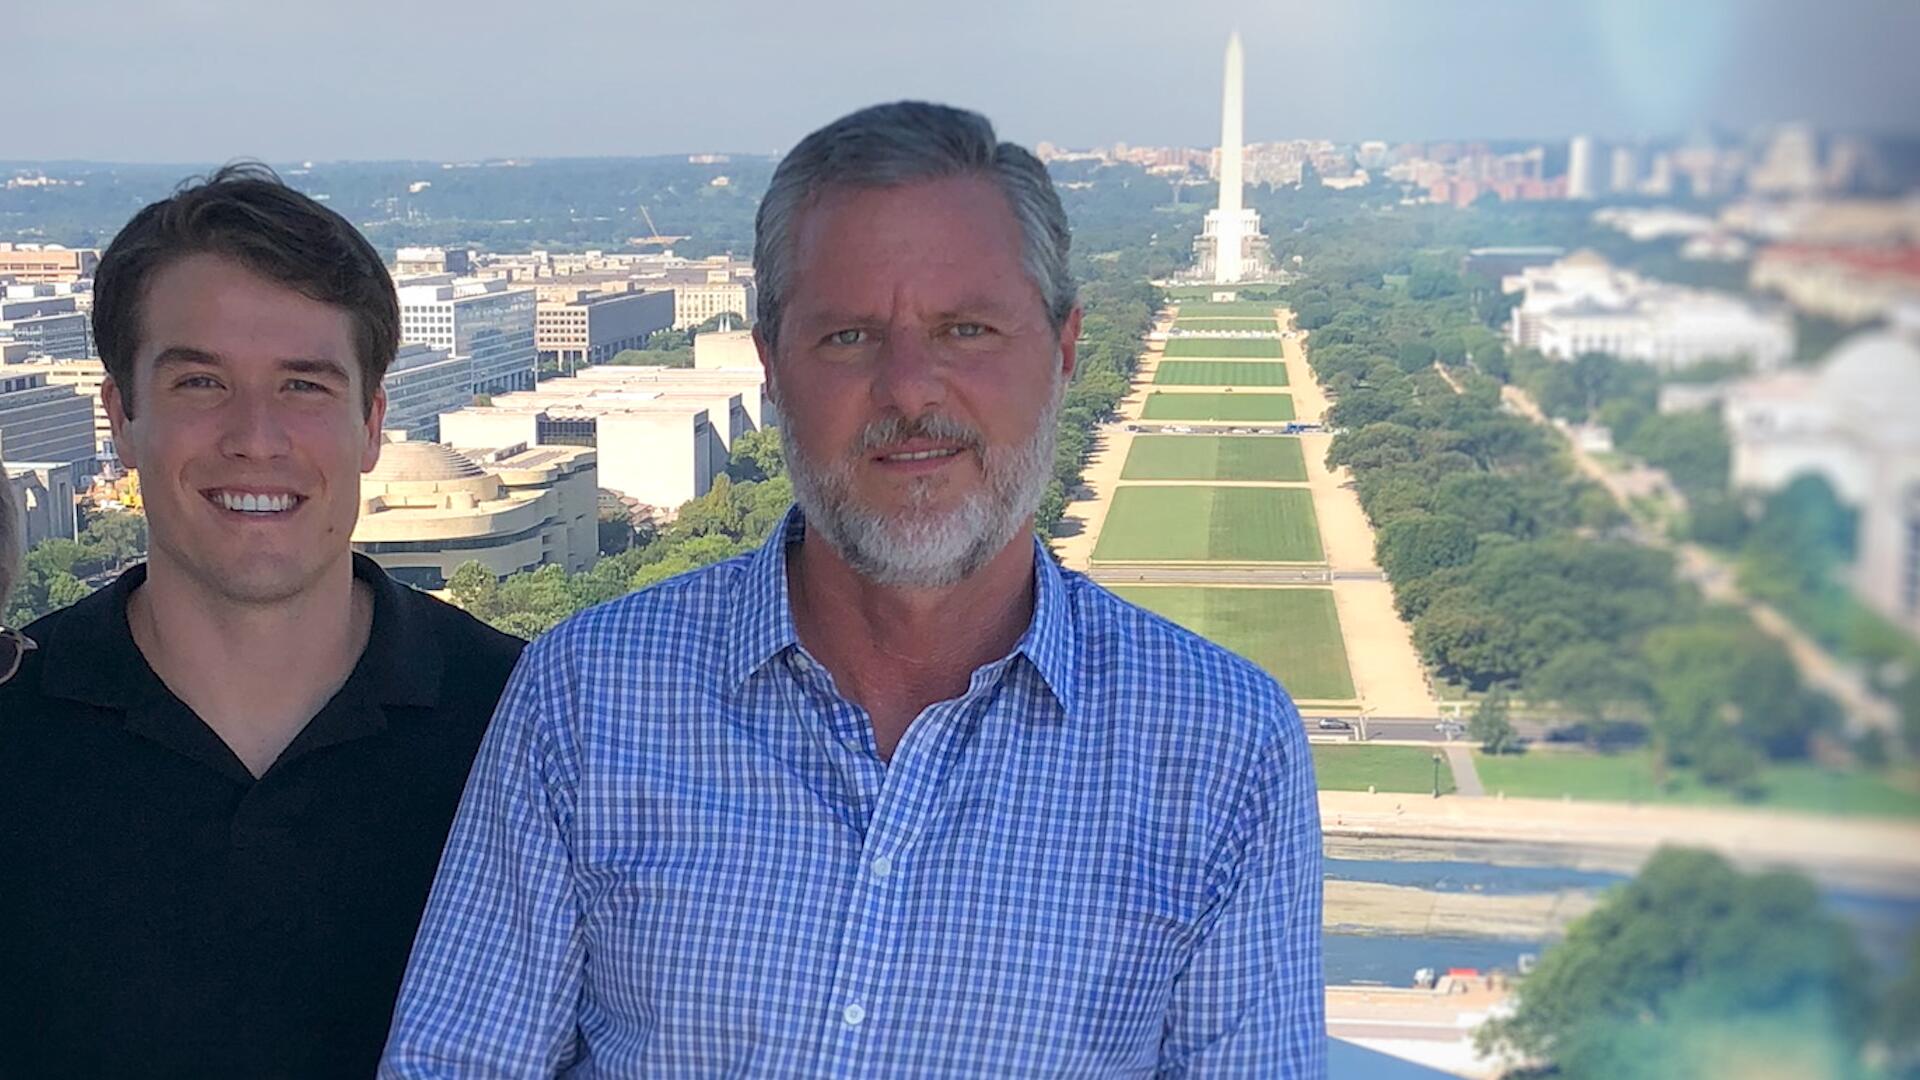 'God Forbid: The Sex Scandal That Brought Down A Dynasty' photo showing Giancarlo Granda and Jerry Falwell Jr. in a photo in front of the Washington Memorial.